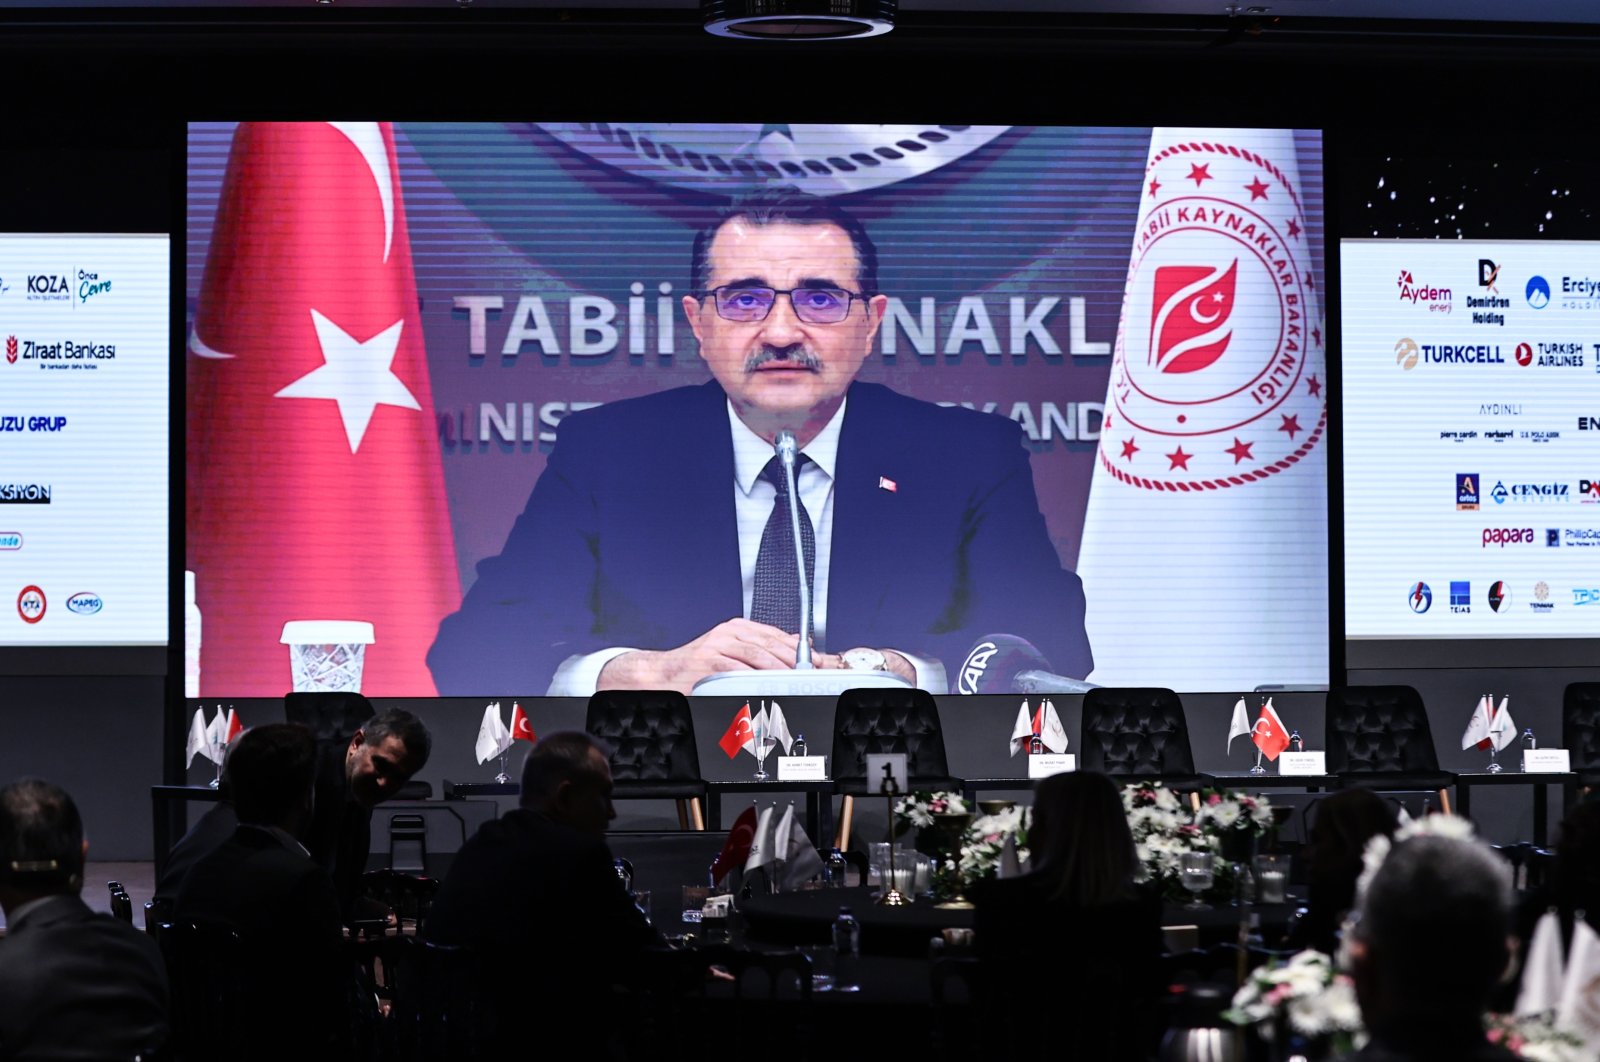 Energy and Natural Resources Minister Fatih Dönmez speaks in a video message broadcast at the “Century of Türkiye Summit” at the Turkuvaz Media Center in Istanbul, Feb. 2, 2023. (AA Photo)